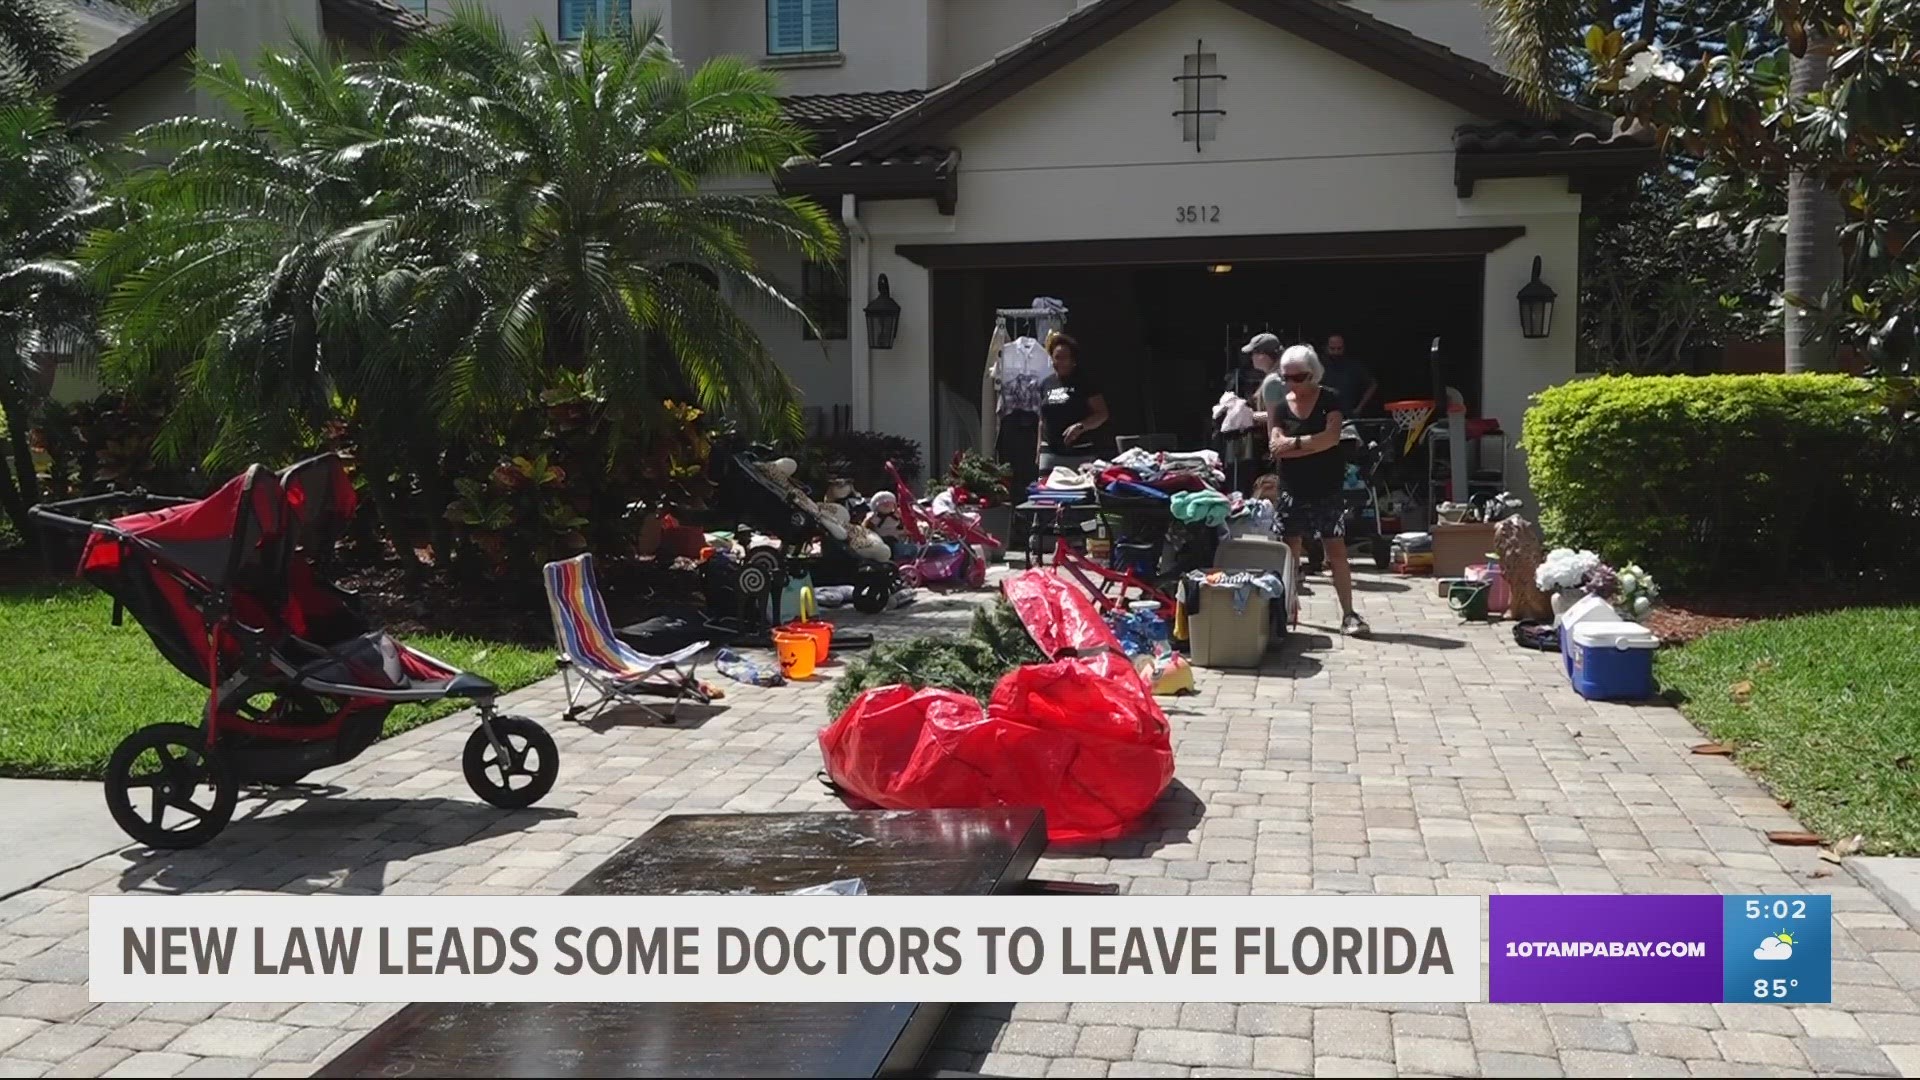 Within hours of Gov. Ron DeSantis signing the new six-week abortion law, Dr. Rachel Rapkin was holding a yard sale in front of her home in Tampa.